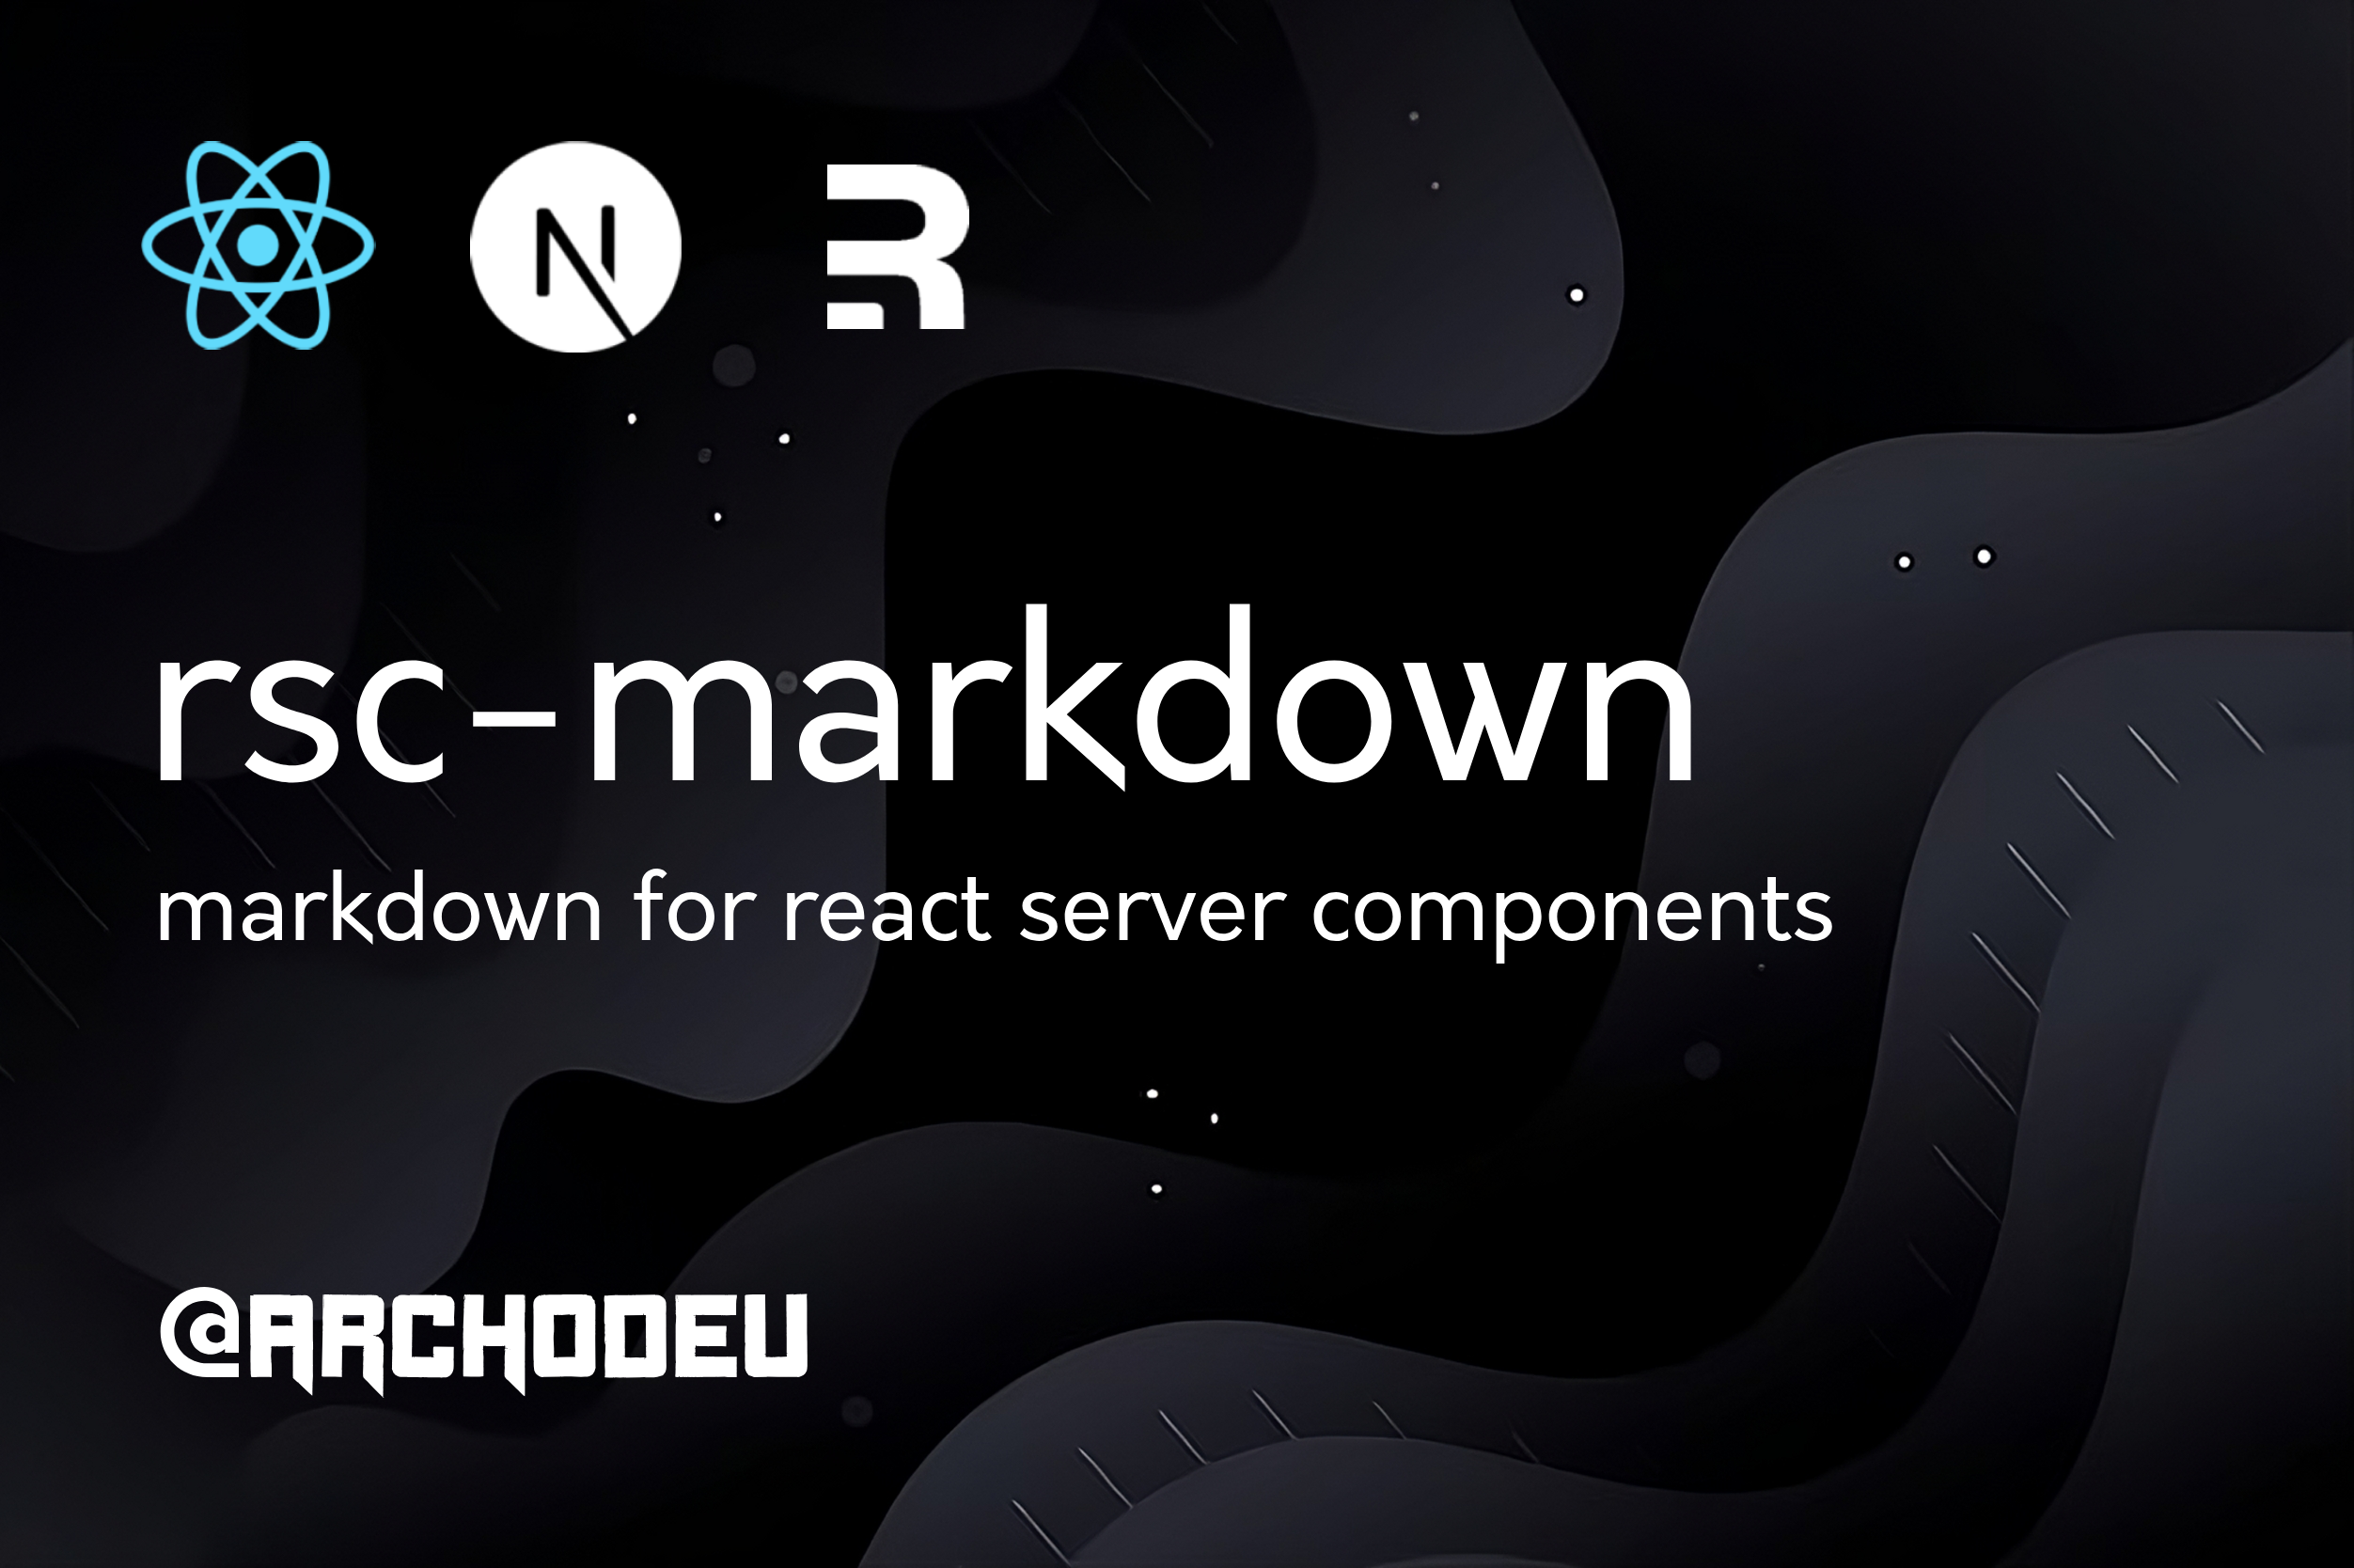 rsc-markdown: markdown for react server components